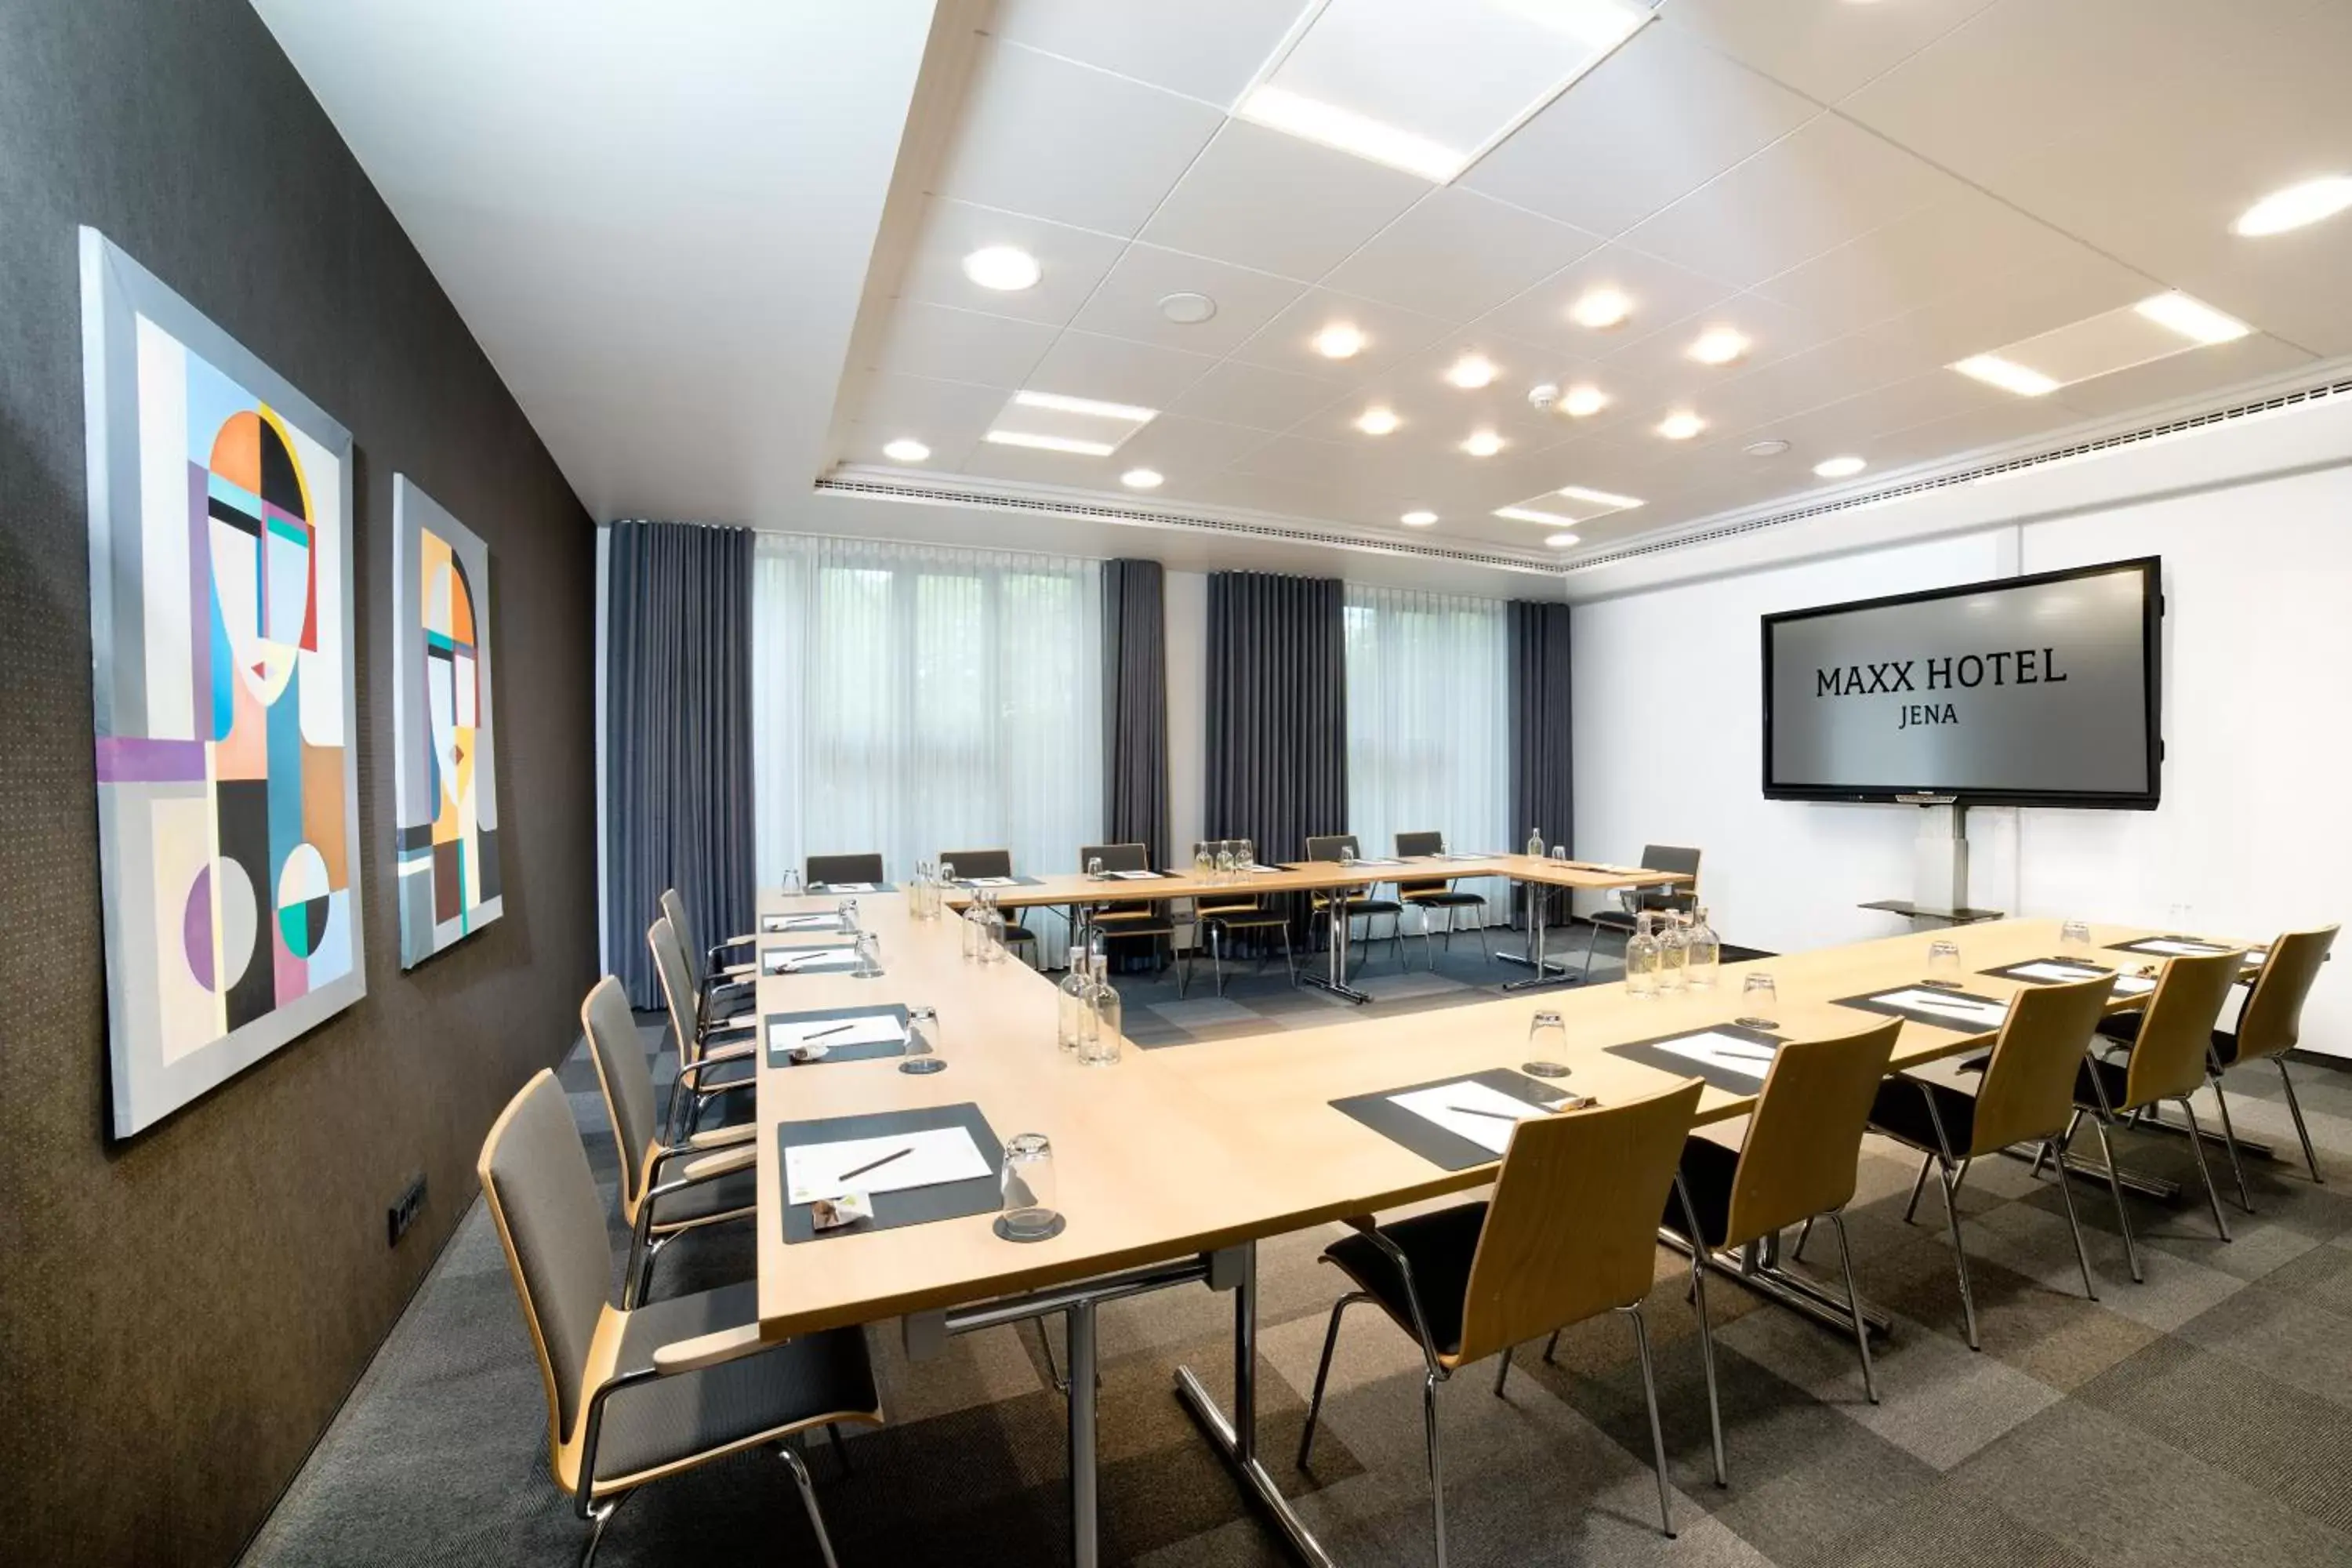 Meeting/conference room in MAXX Hotel Jena